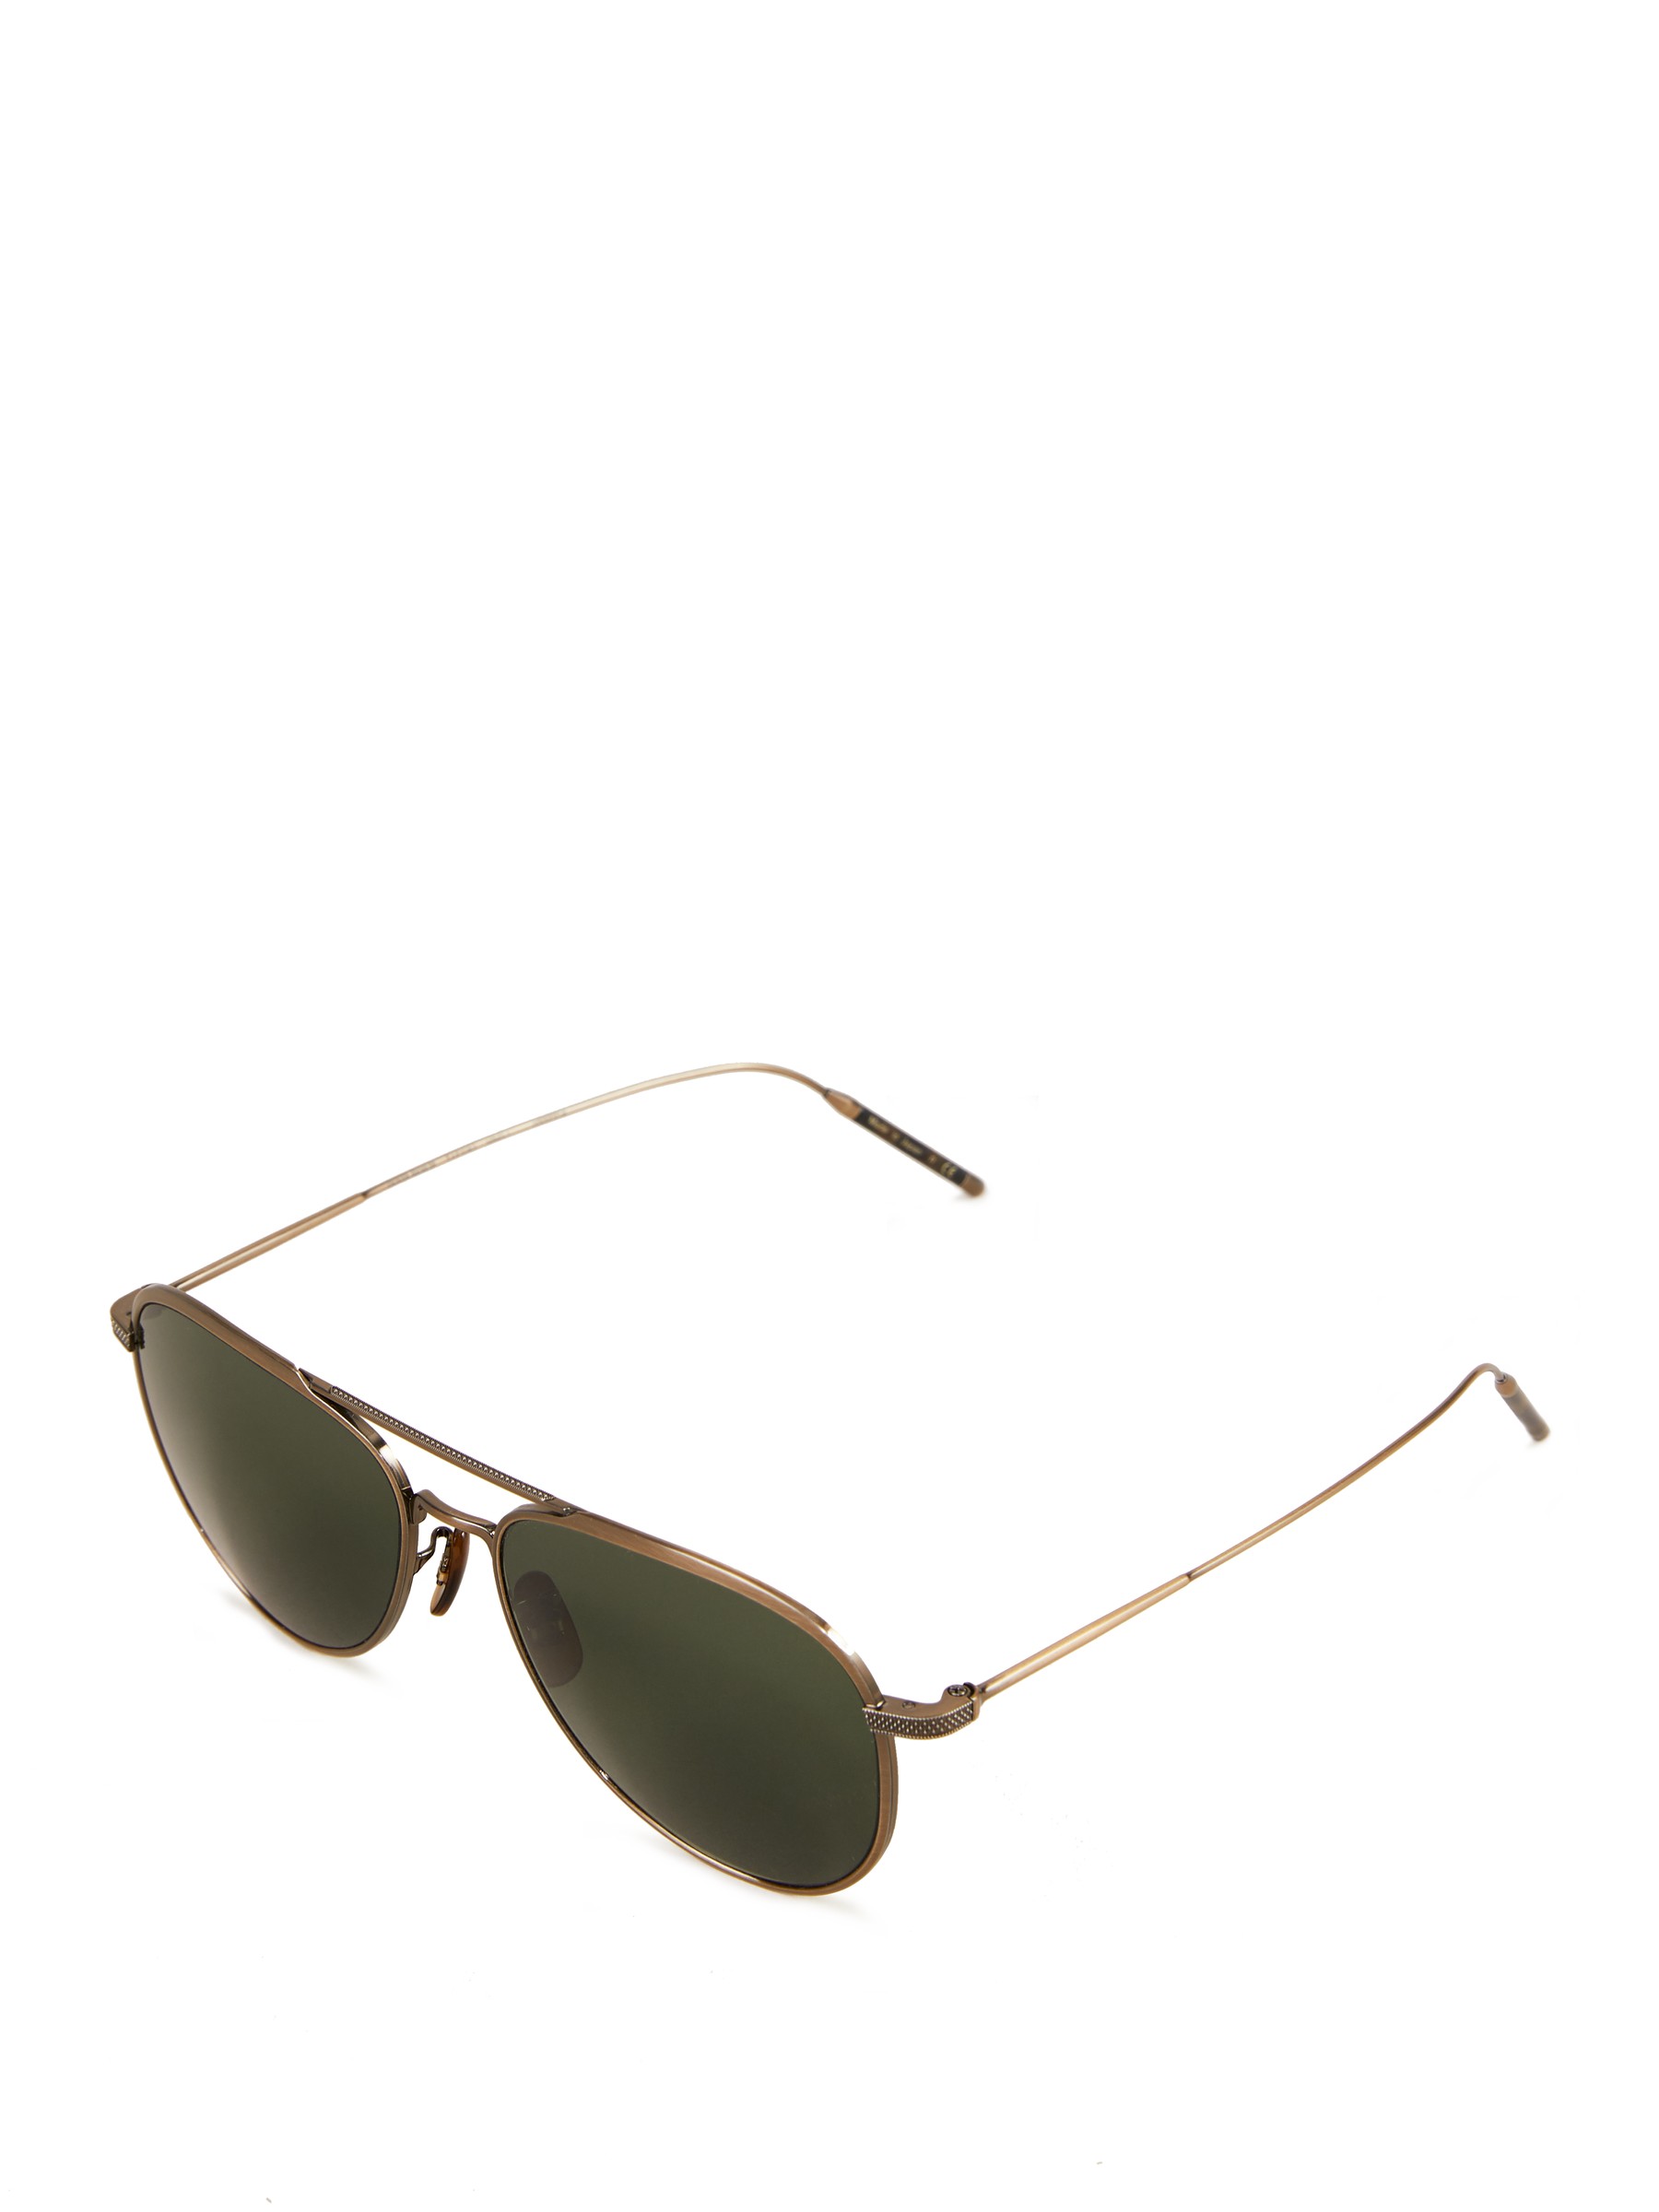 Oliver Peoples Sunglasses 'TK-3' Gold/Brown | Sunglasses